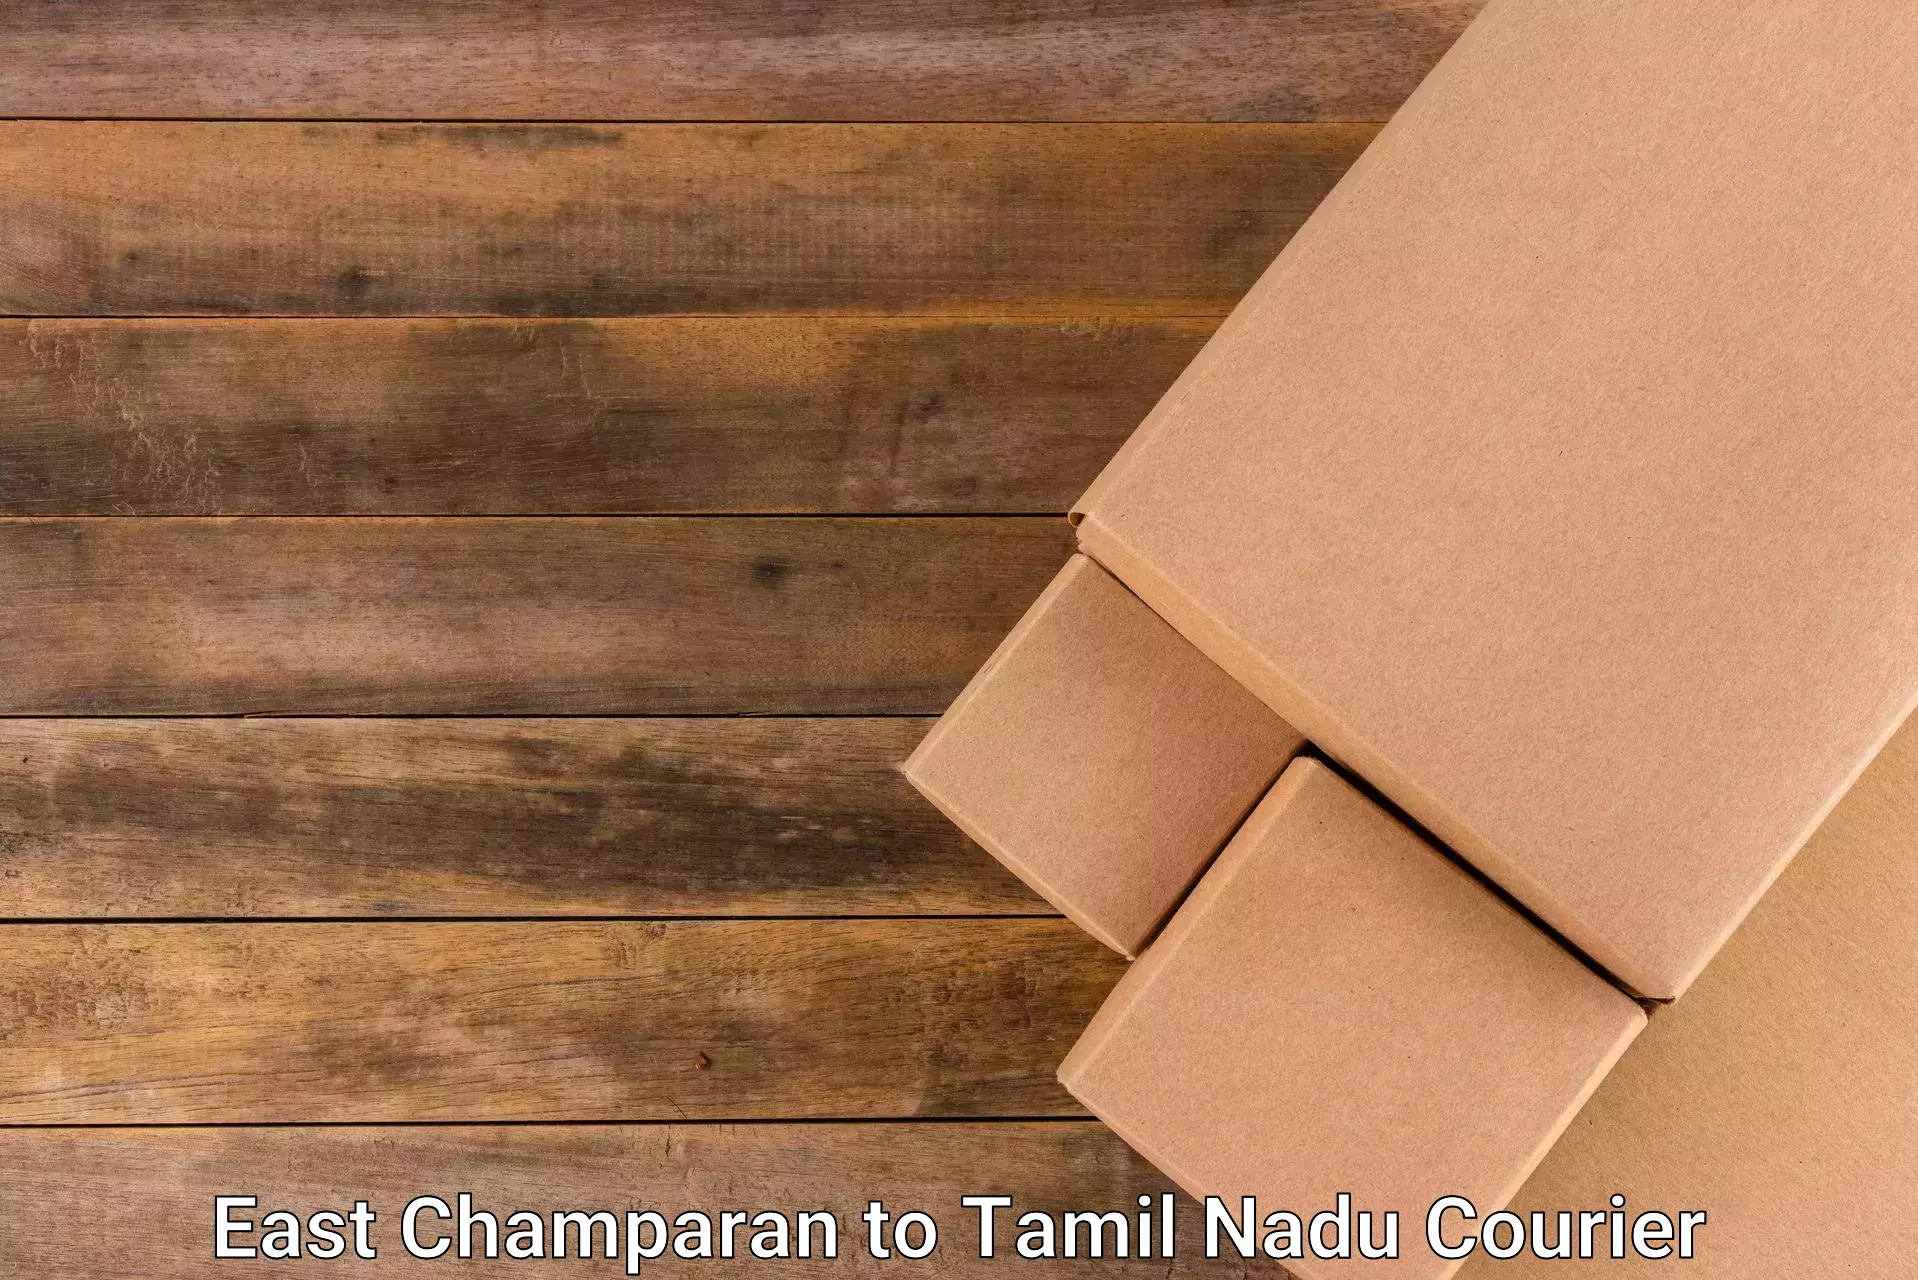 Reliable courier service East Champaran to Aruppukkottai